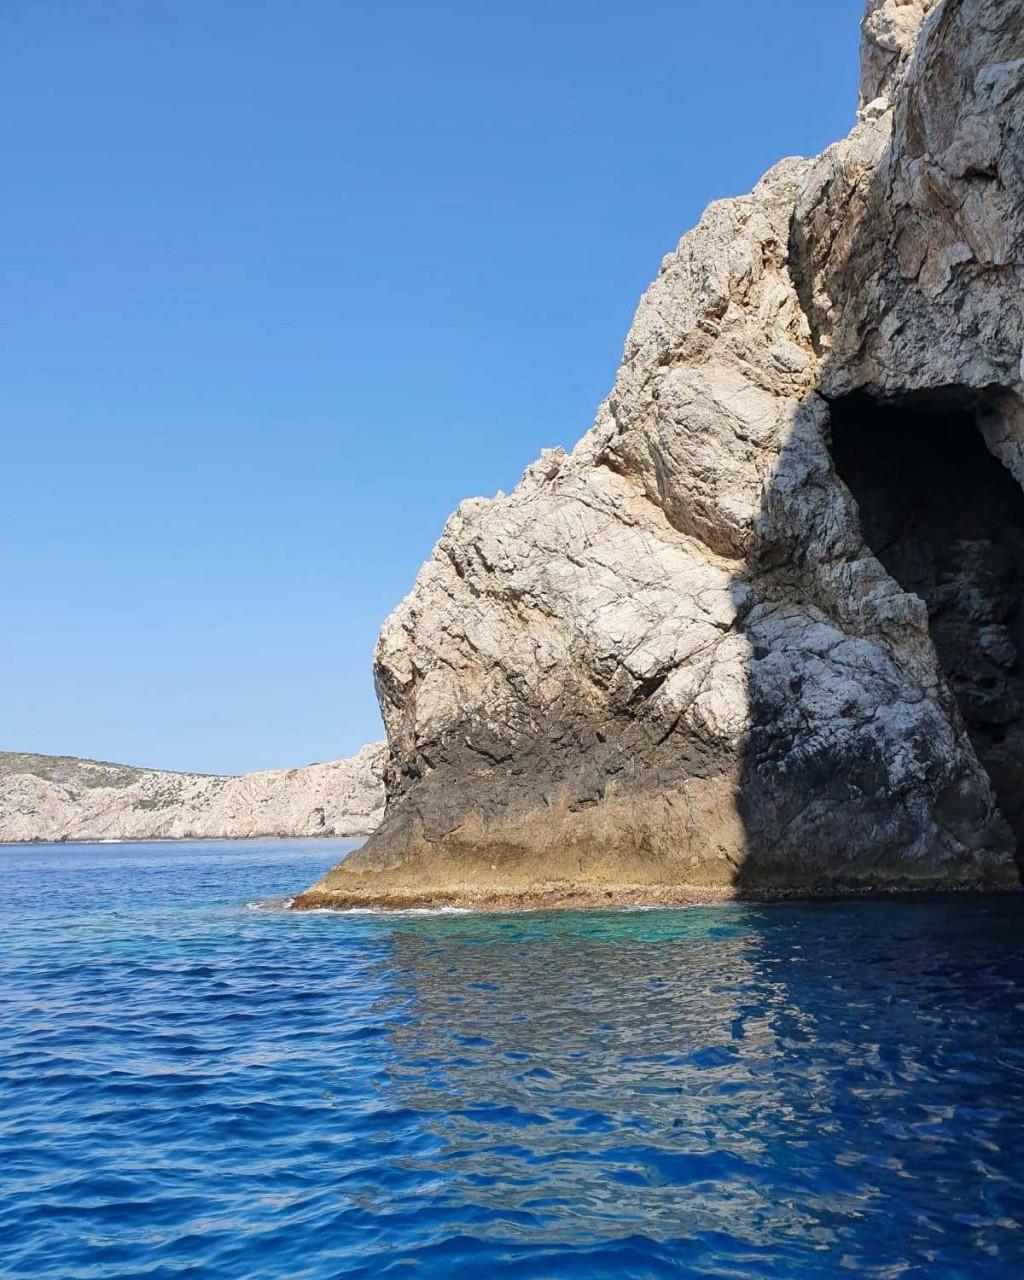 The entrance of the Monk Seal Cave by Biševo island